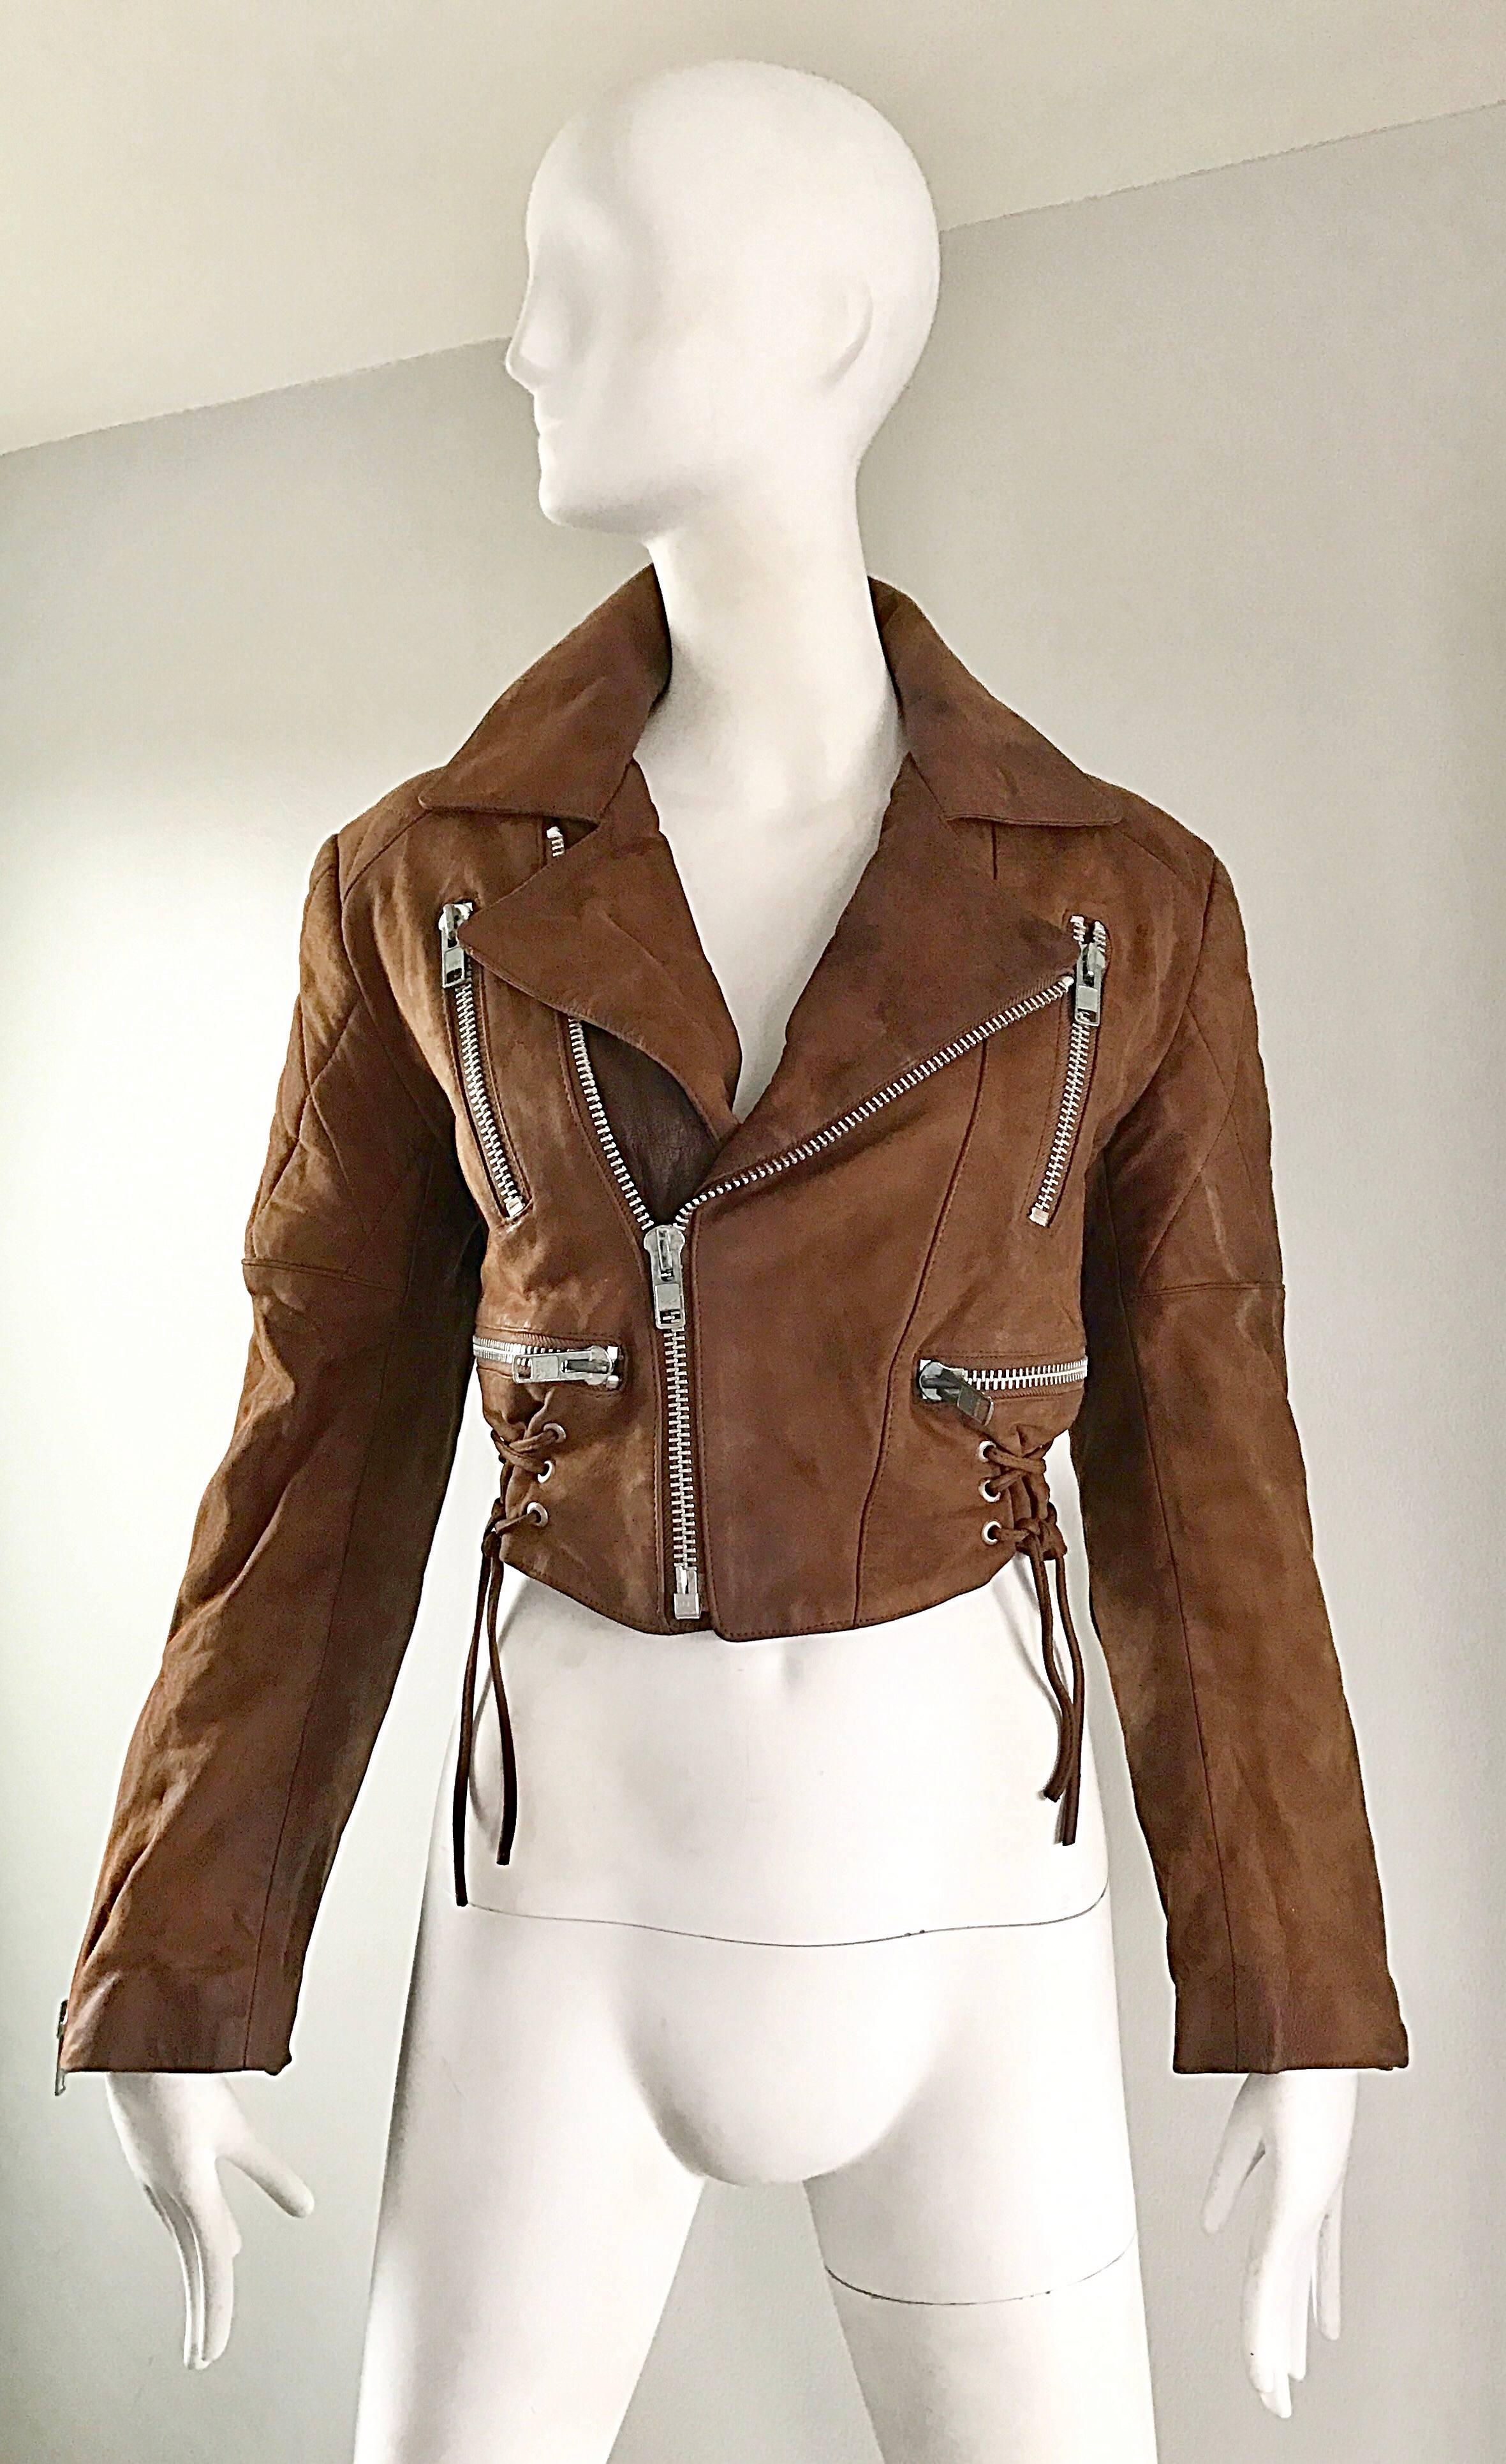 Awesome 1980s MICHAEL HOBAN for NORTH BEACH LEATHER light brown distressed leather cropped motorcycle jacket! Features super soft distressed leather, with large silver metal zipper details thorughout. Four large pockets on the front bodice zip shut.